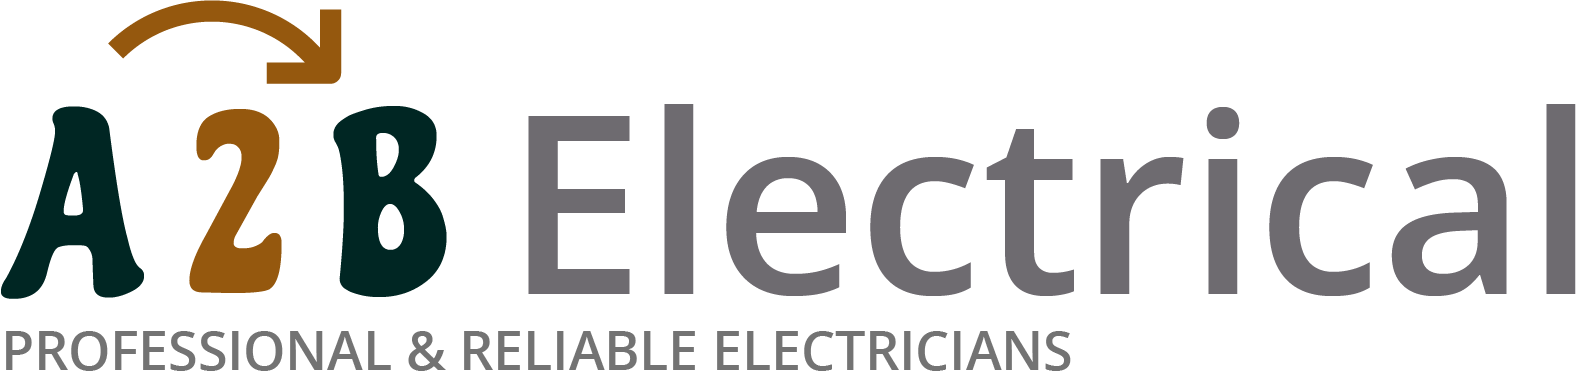 If you have electrical wiring problems in Swindon, we can provide an electrician to have a look for you. 